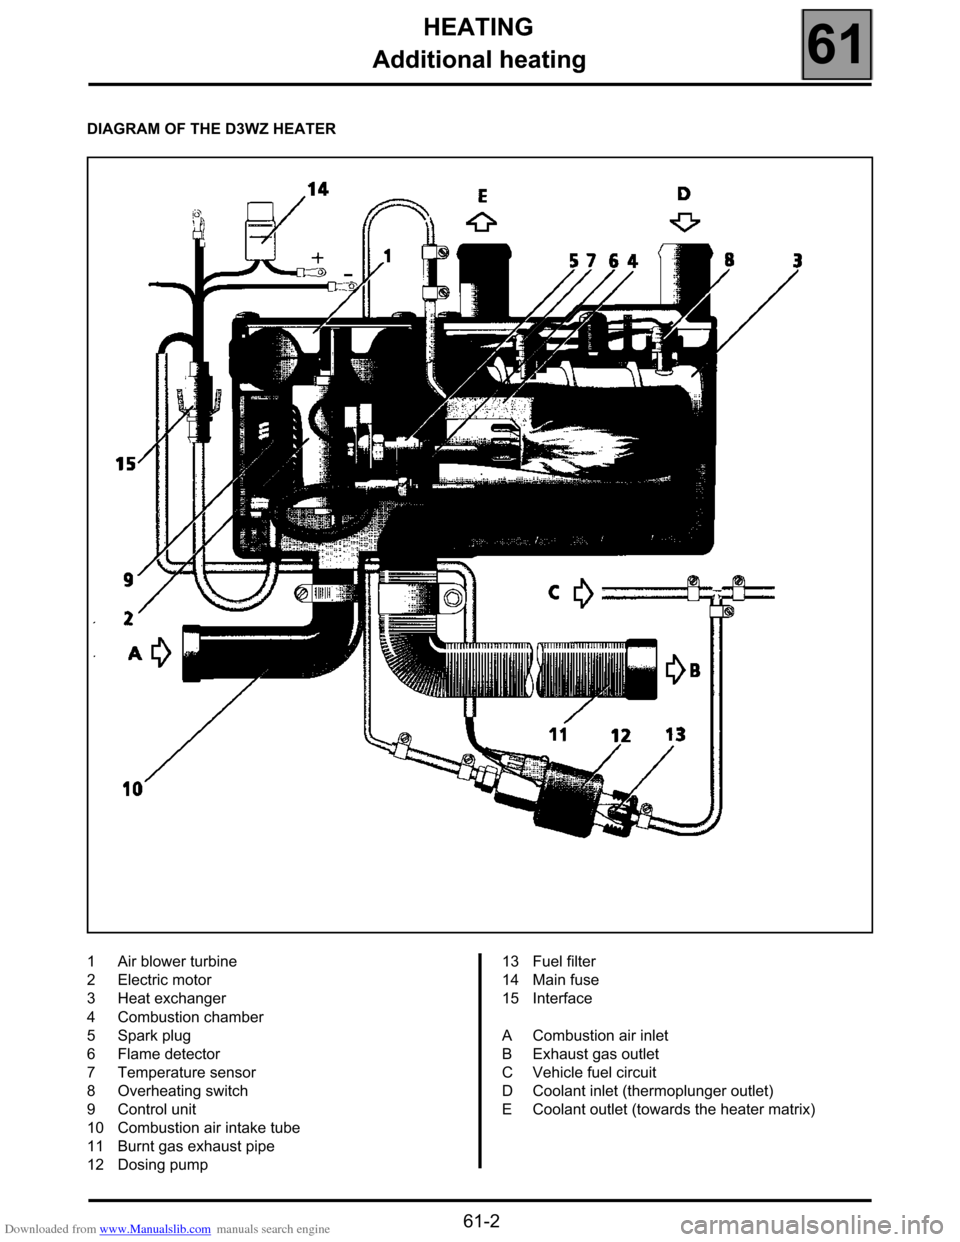 RENAULT ESPACE 2000 J66 / 3.G Technical Note 3426A Workshop Manual Downloaded from www.Manualslib.com manuals search engine HEATING
Additional heating
61
61-2
DIAGRAM OF THE D3WZ HEATER
1Air blower turbine
2Electric motor
3Heat exchanger
4Combustion chamber
5Spark pl